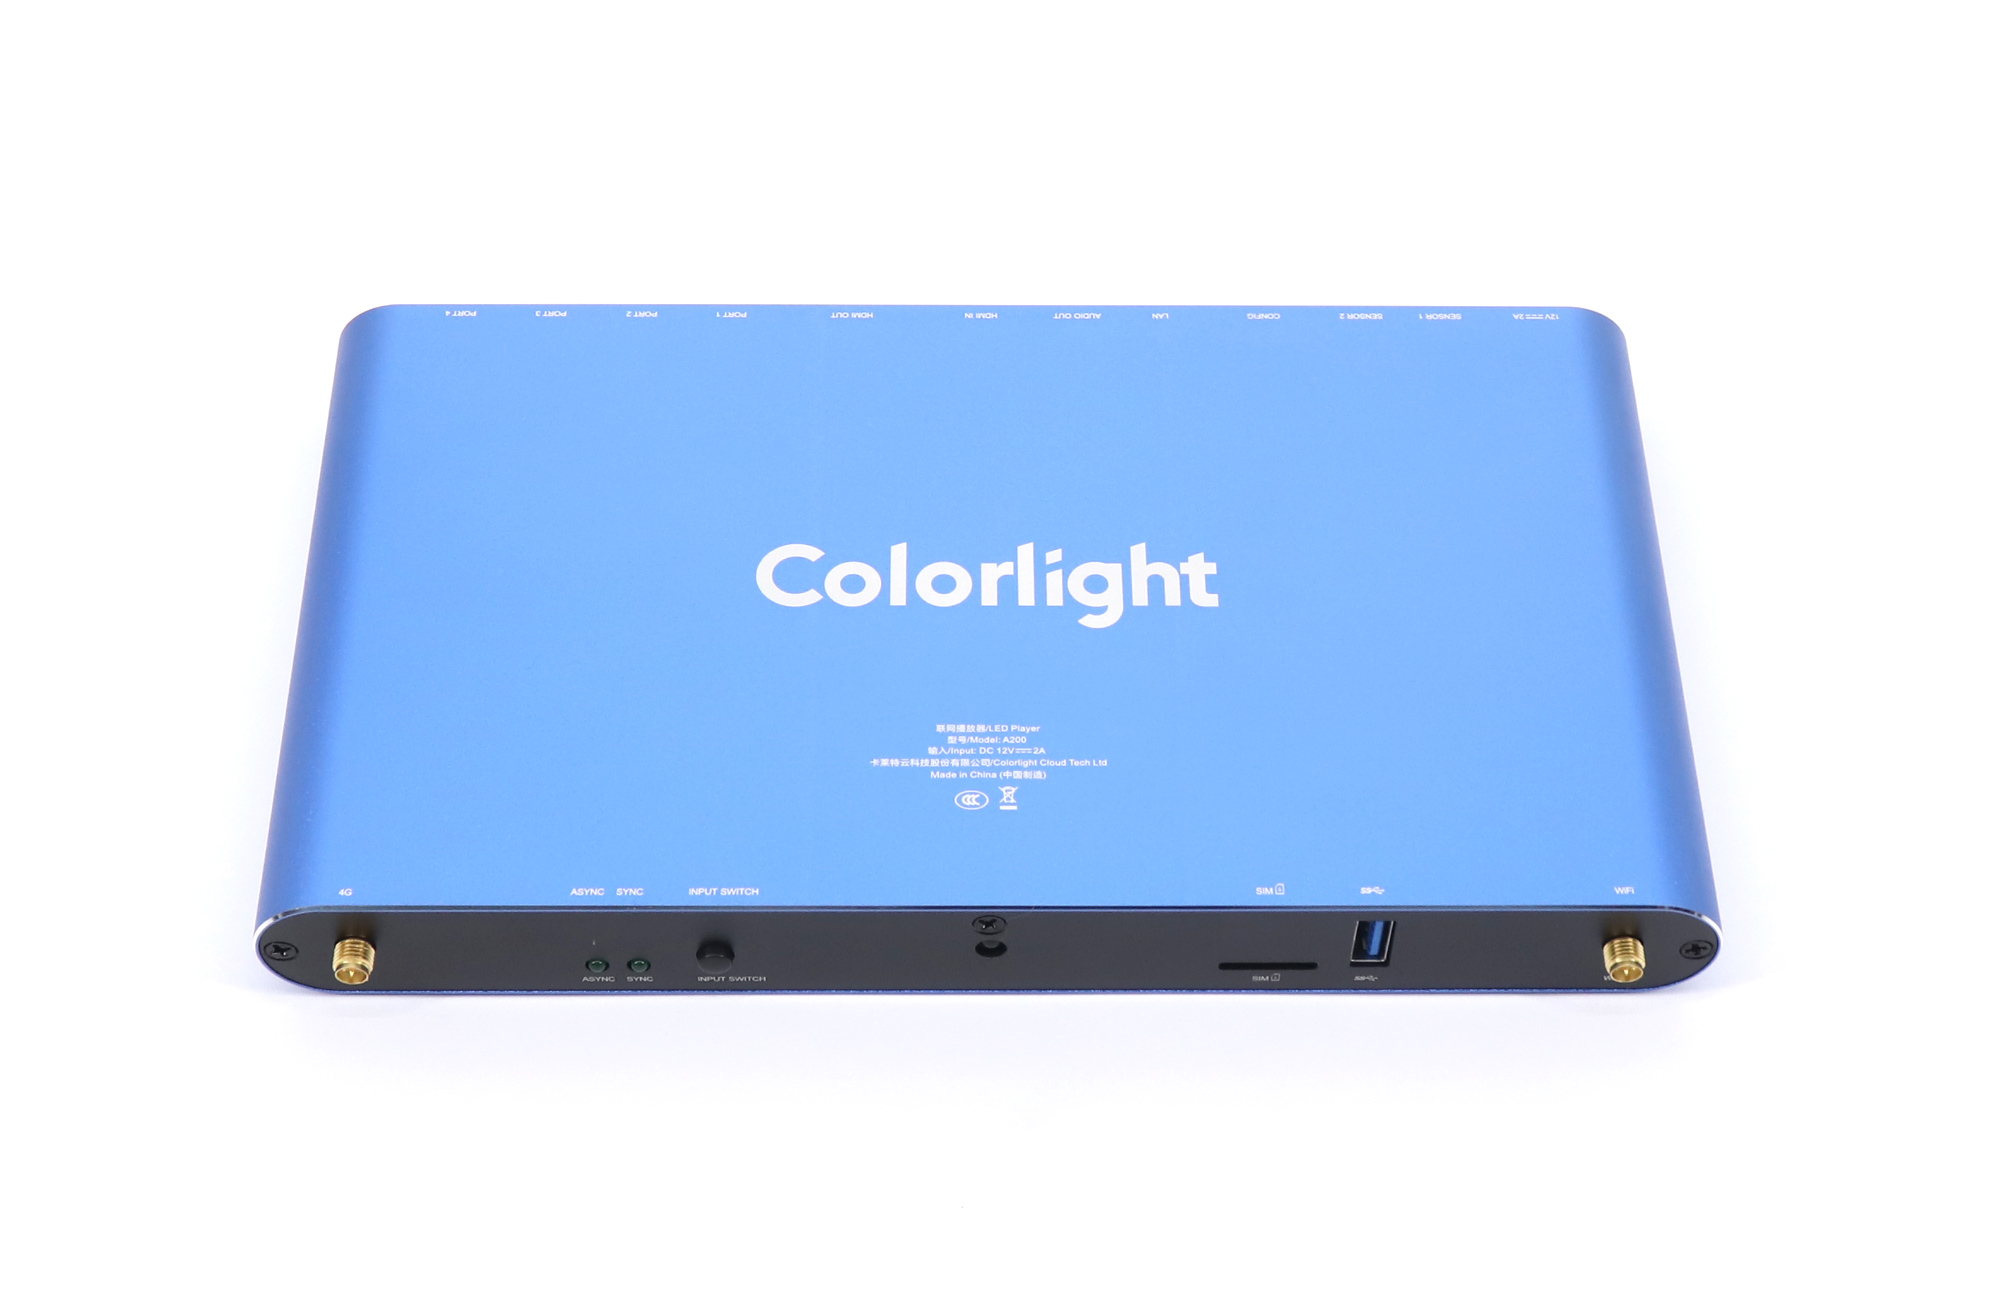 Colorlight A200 LED Display Cloud Player